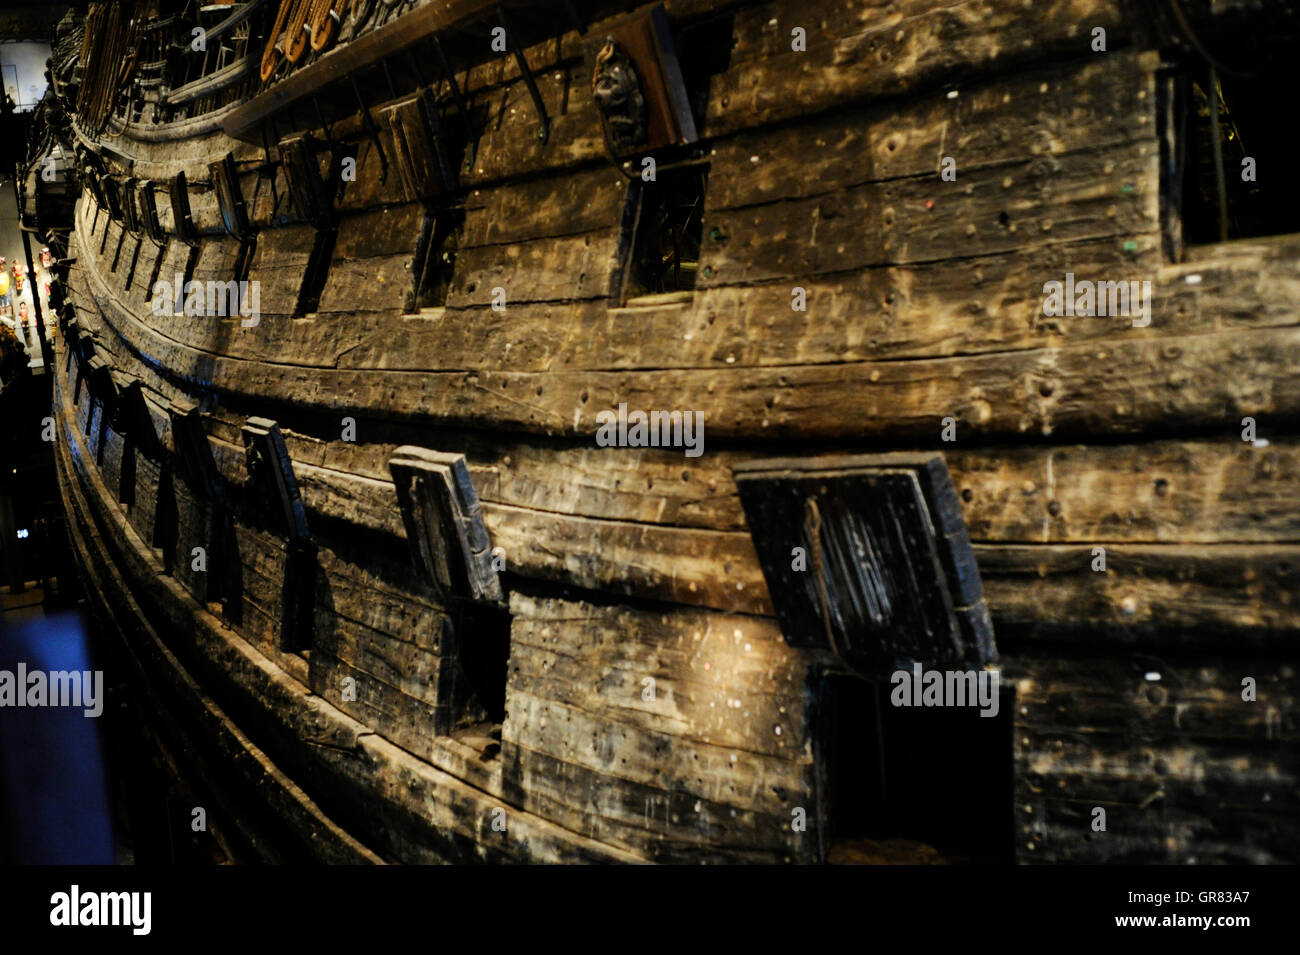 Warship Vasa. Built at 1626-1628 on the orders of the King of Sweden Gustavus Adolphus. Cannonry. Vasa Museum. Stockholm. Sweden. Stock Photo